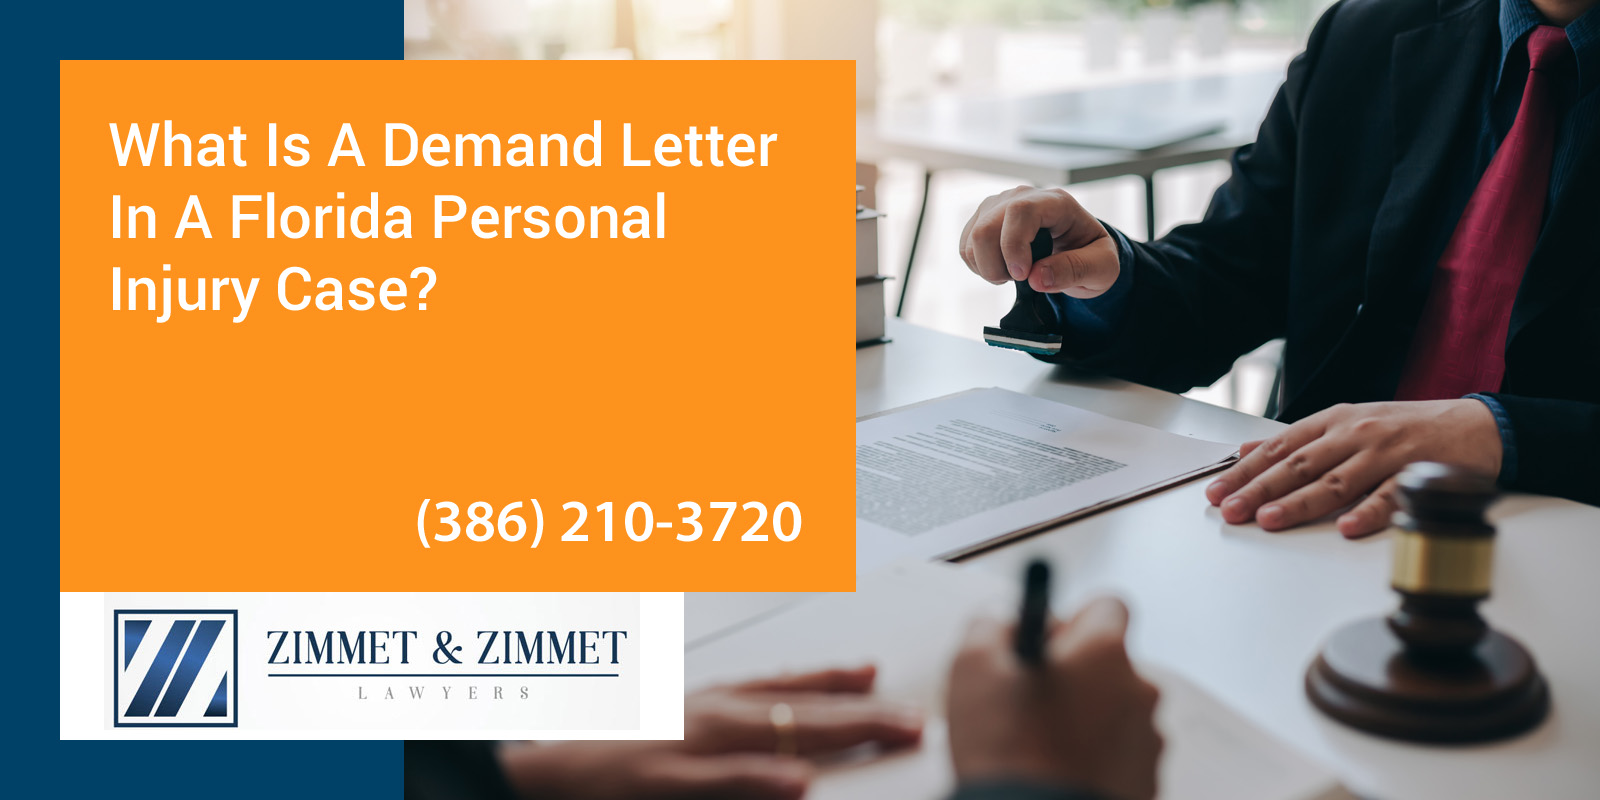 Daytona Beach injury lawyer drafting a demand letter for a client